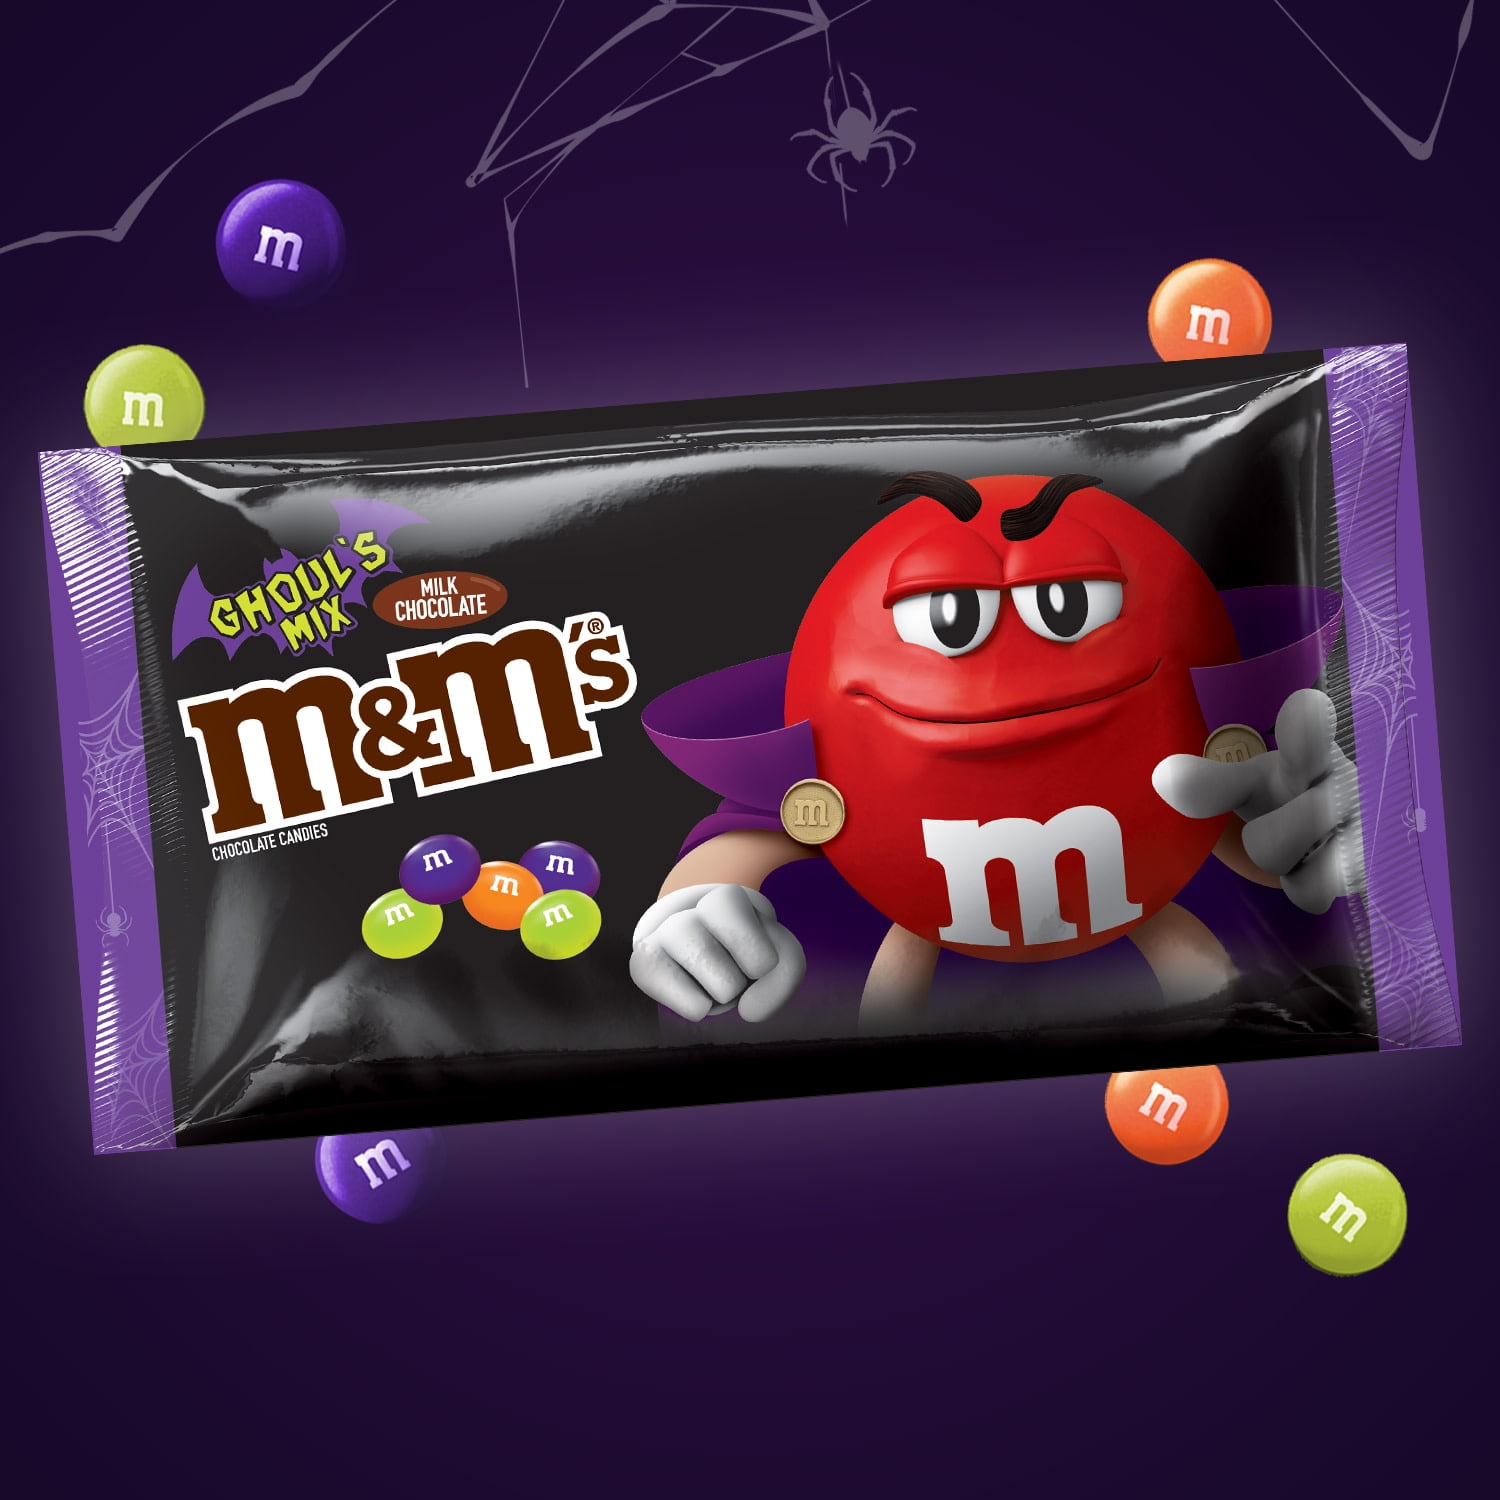  M&M Minis Milk Halloween Chocolate Candy Spooky Edition -  Sweet Milk Peanut Chocolate Halloween Mini M&Ms Bulk Tubes Encased in  Vibrant Candy Shell Colors - Melt in Your Mouth Snacks